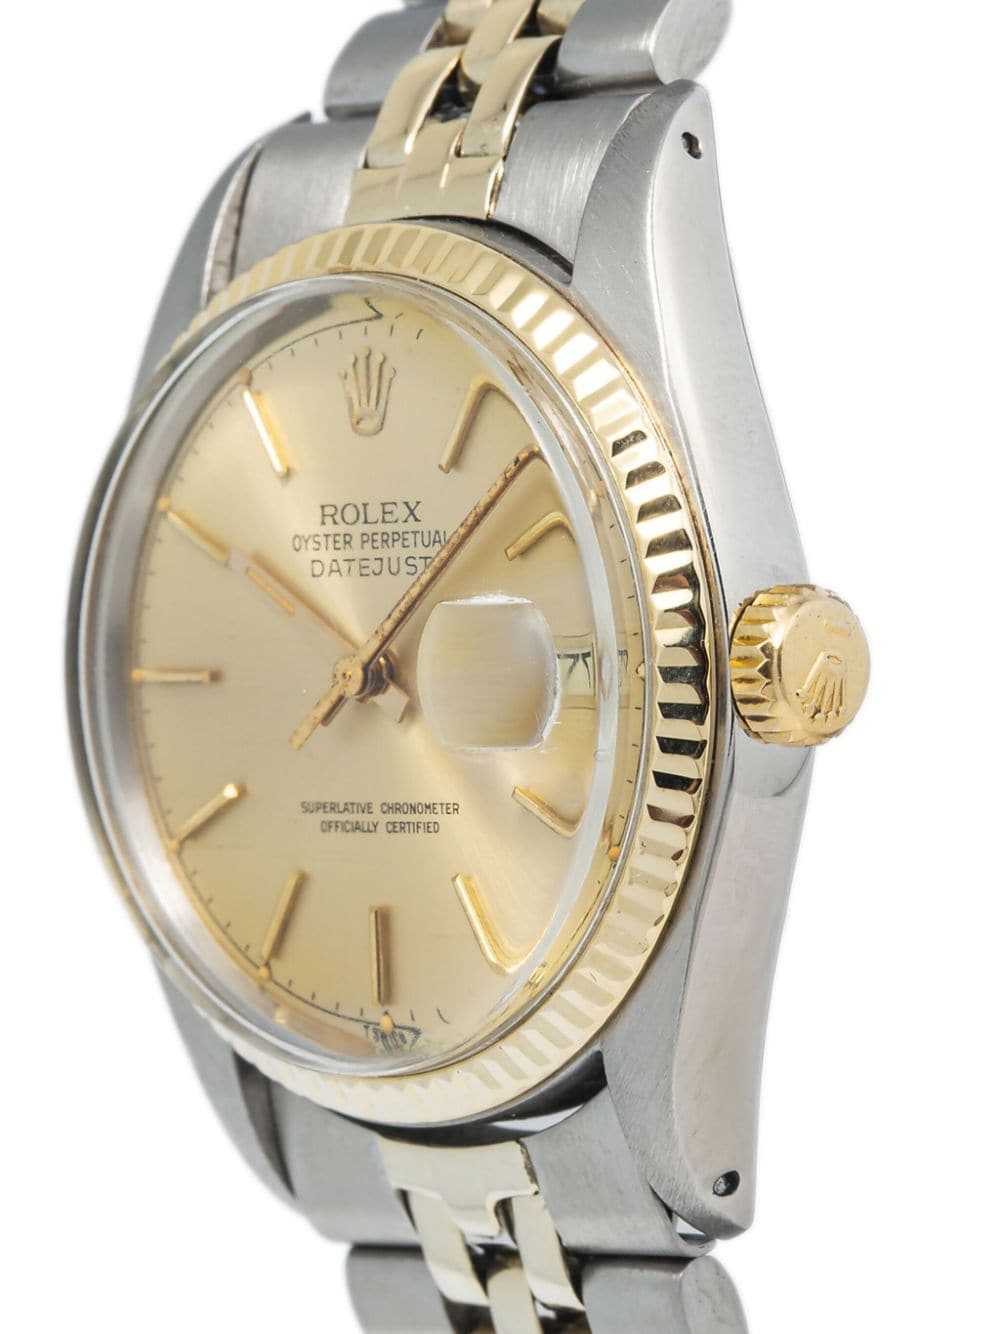 Rolex pre-owned Datejust 36mm - Gold - image 3